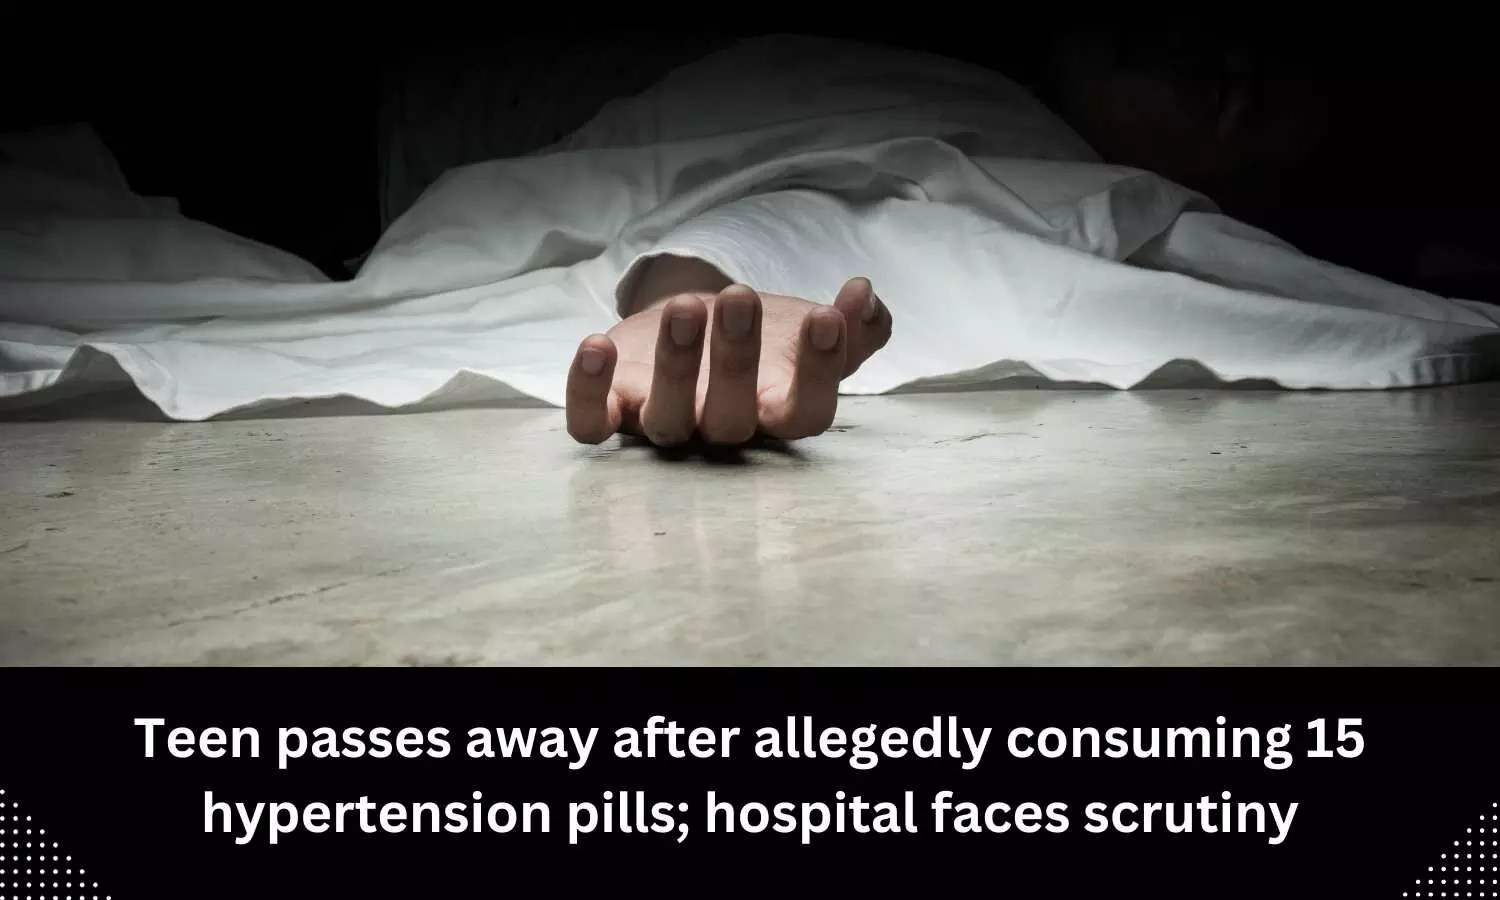 Teen passes away after allegedly consuming 15 hypertension pills